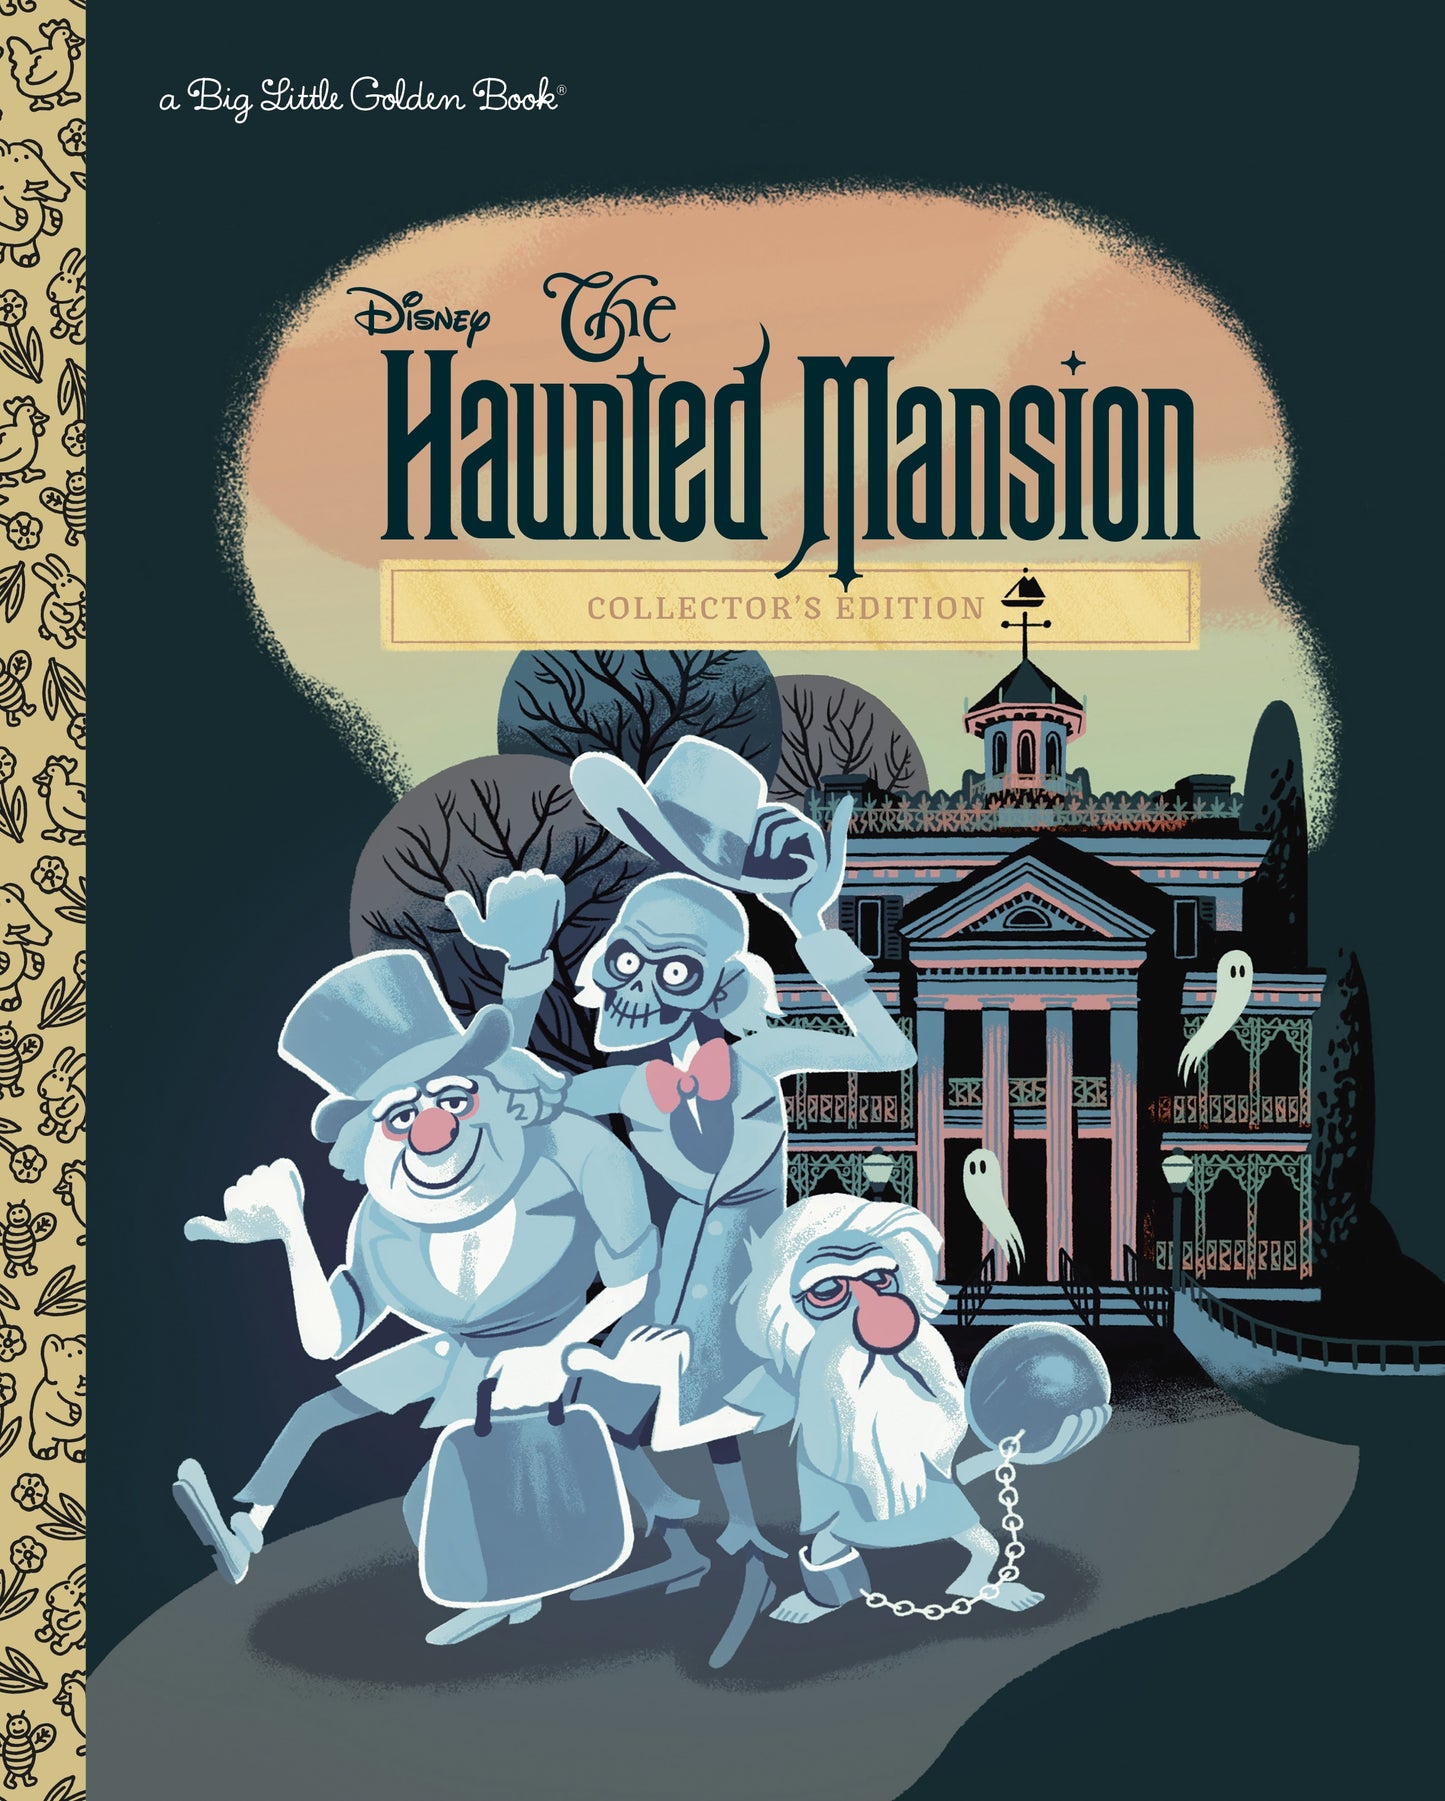 Big Little Golden Book The Haunted Mansion (Disney Classic)